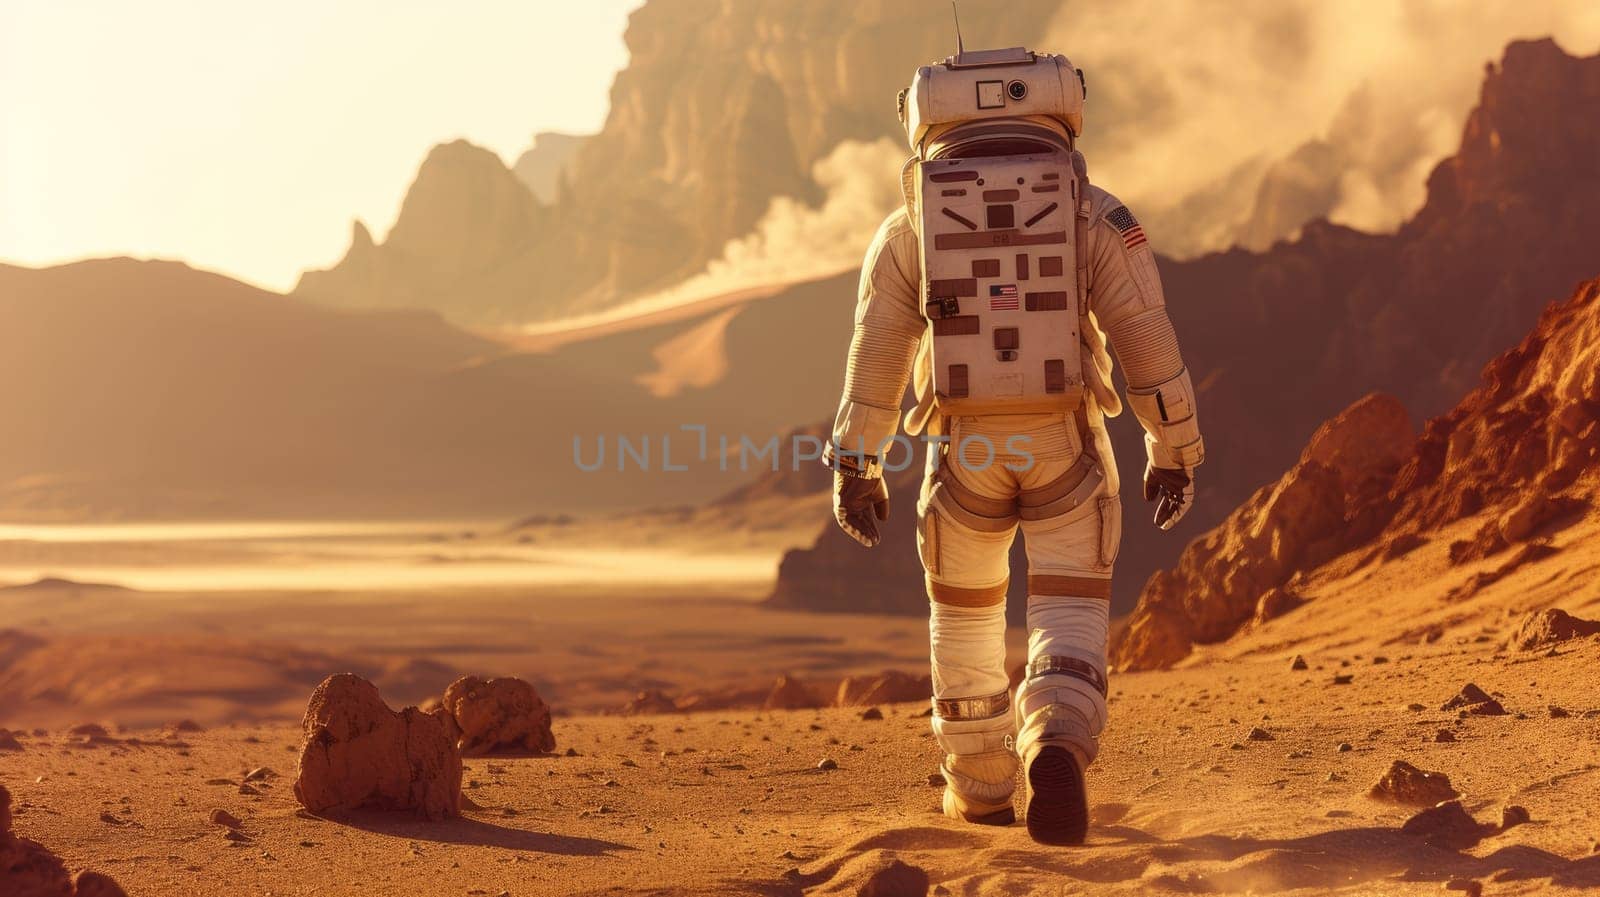 An astronaut in a space suit exploring a distant planet's surface. Resplendent. by biancoblue